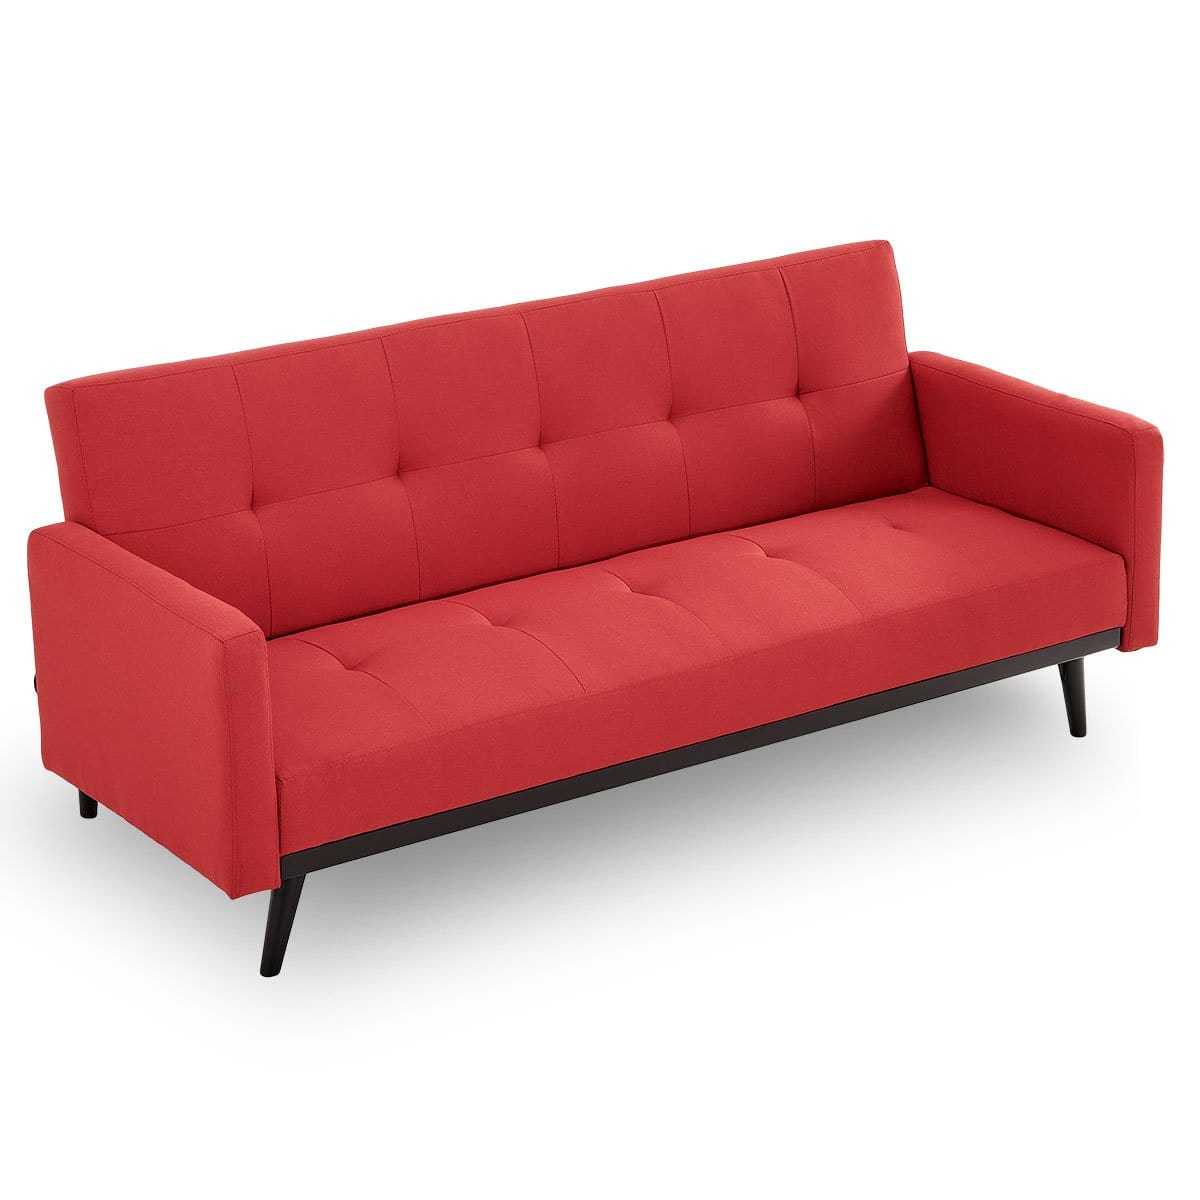 Tufted Faux Linen 3-Seater Sofa Bed With Armrests - Red